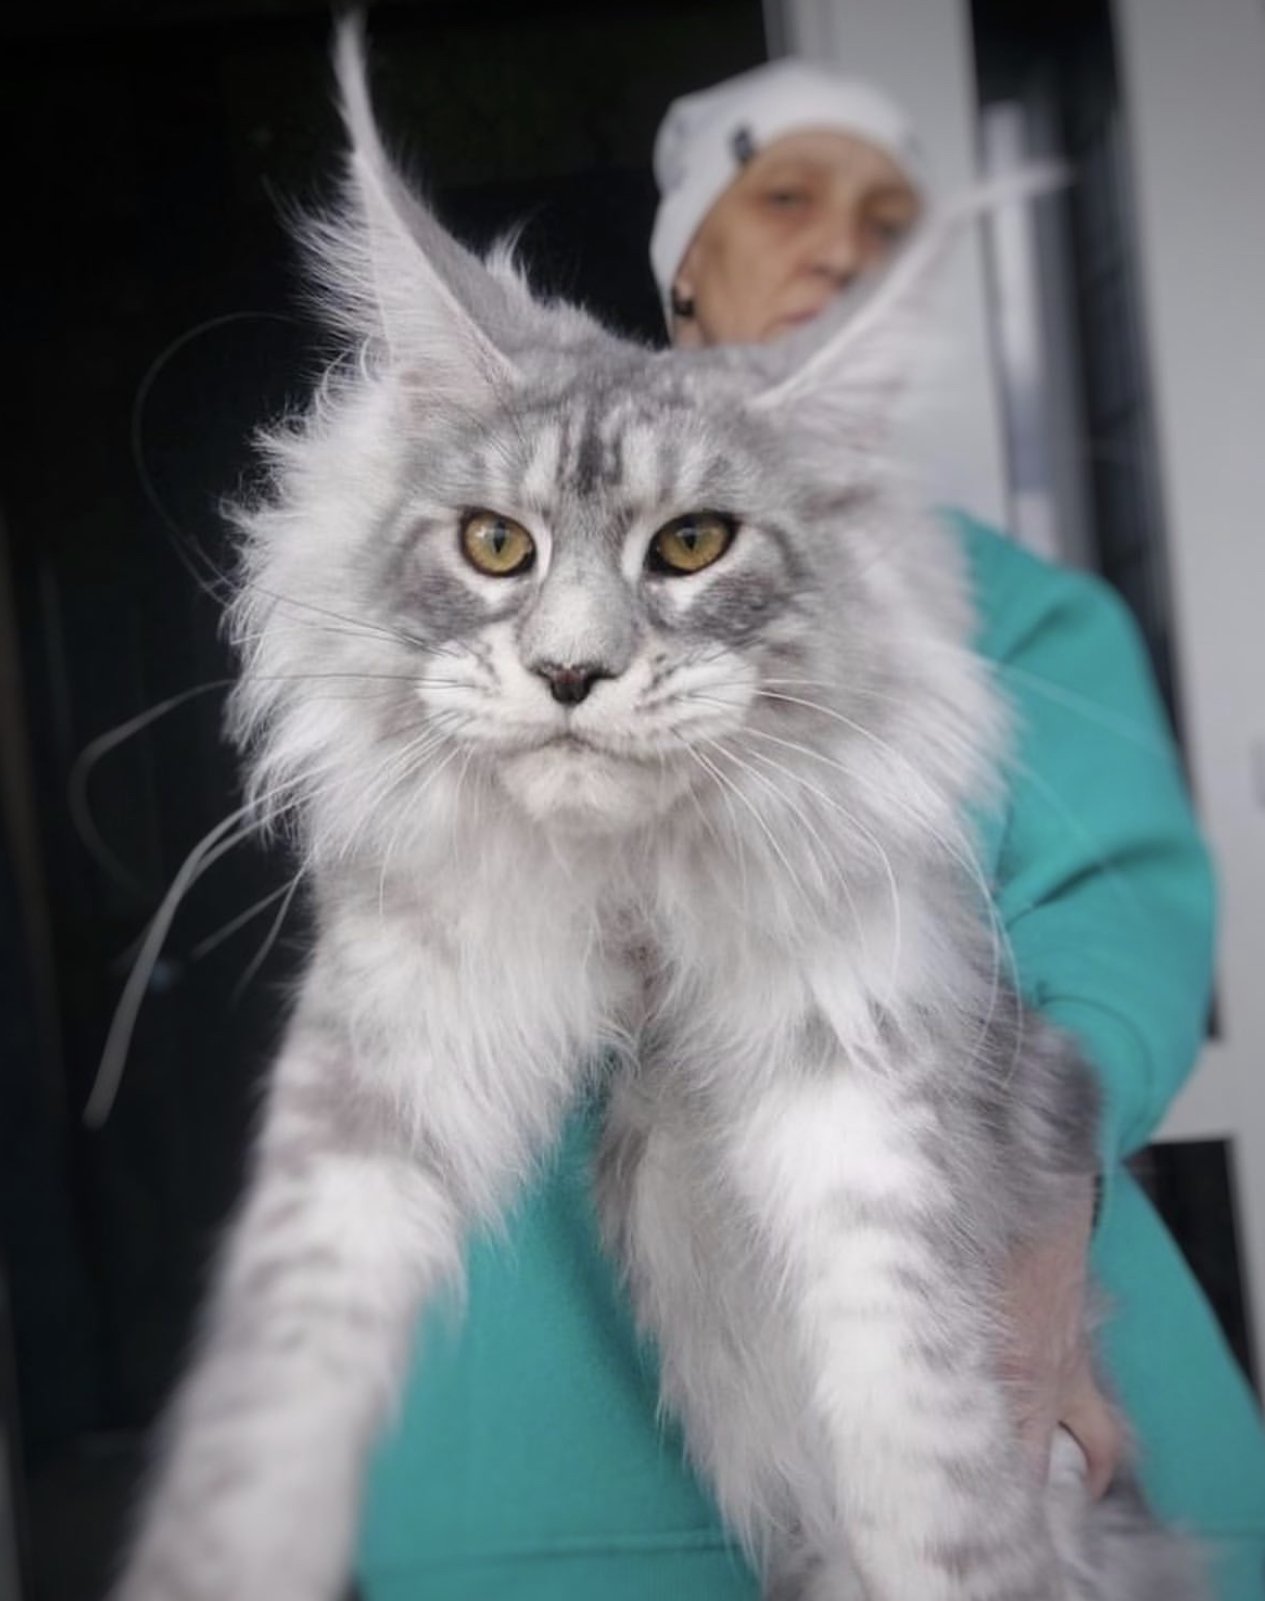 Giant Maine Coon Size Cats for Sale | Maine coon price